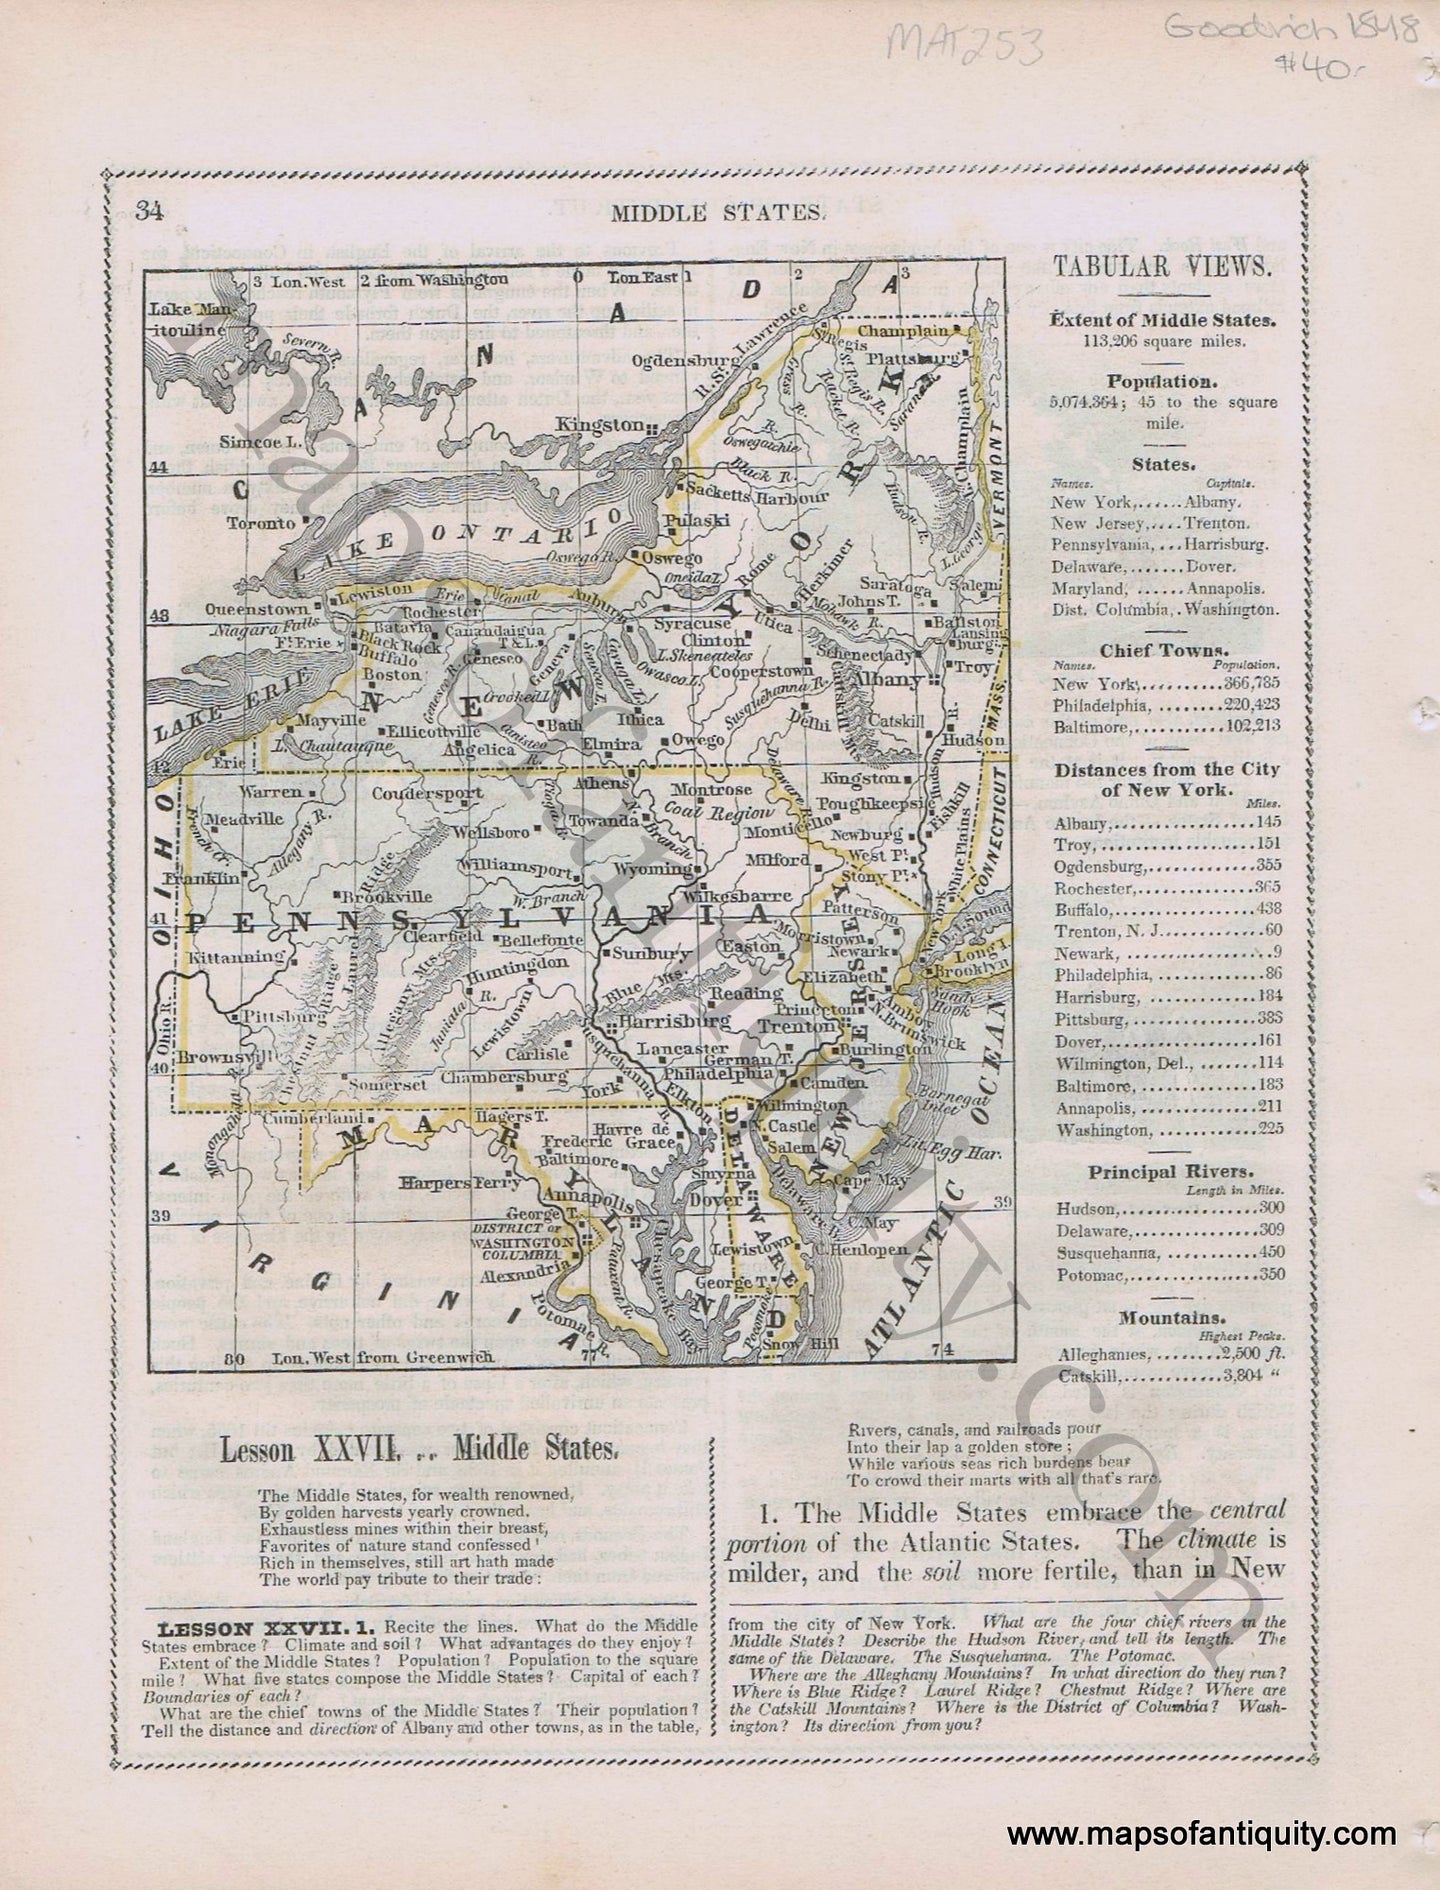 Antique-Printed-Color-Map-Middle-States-Verso-View-of-Yale-College-Deaf-and-Dumb-Asylum-Emigration-from-Massachusetts-to-Connecticut-1848-Goodrich-United-States-Mid-Atlantic1800s-19th-century-Maps-of-Antiquity